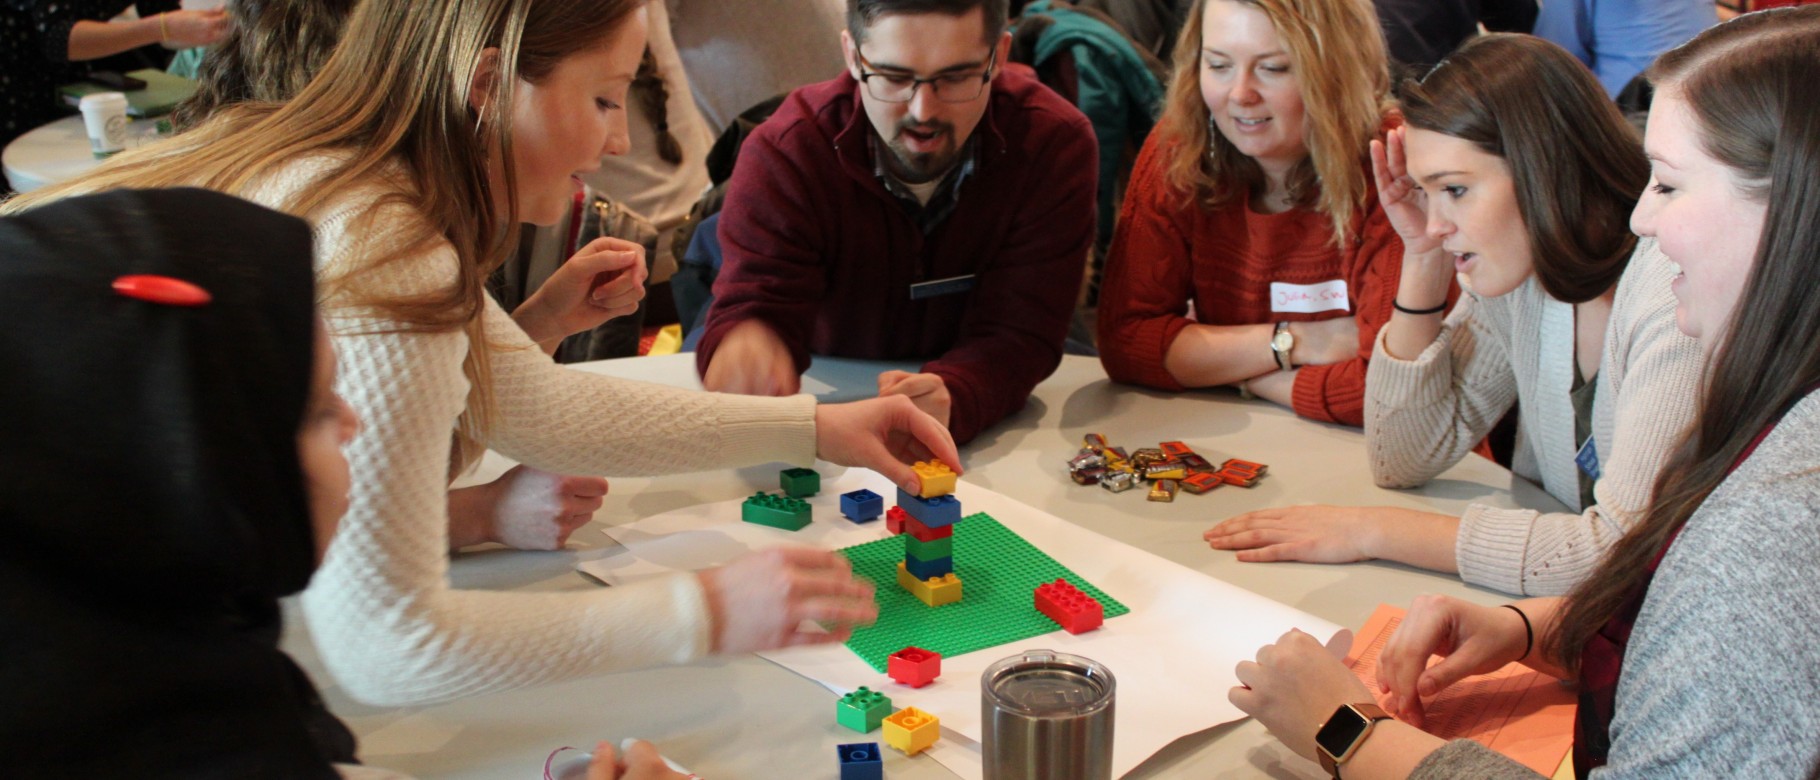 Students from various colleges within the University of New England work together during a collaborative learning activity.